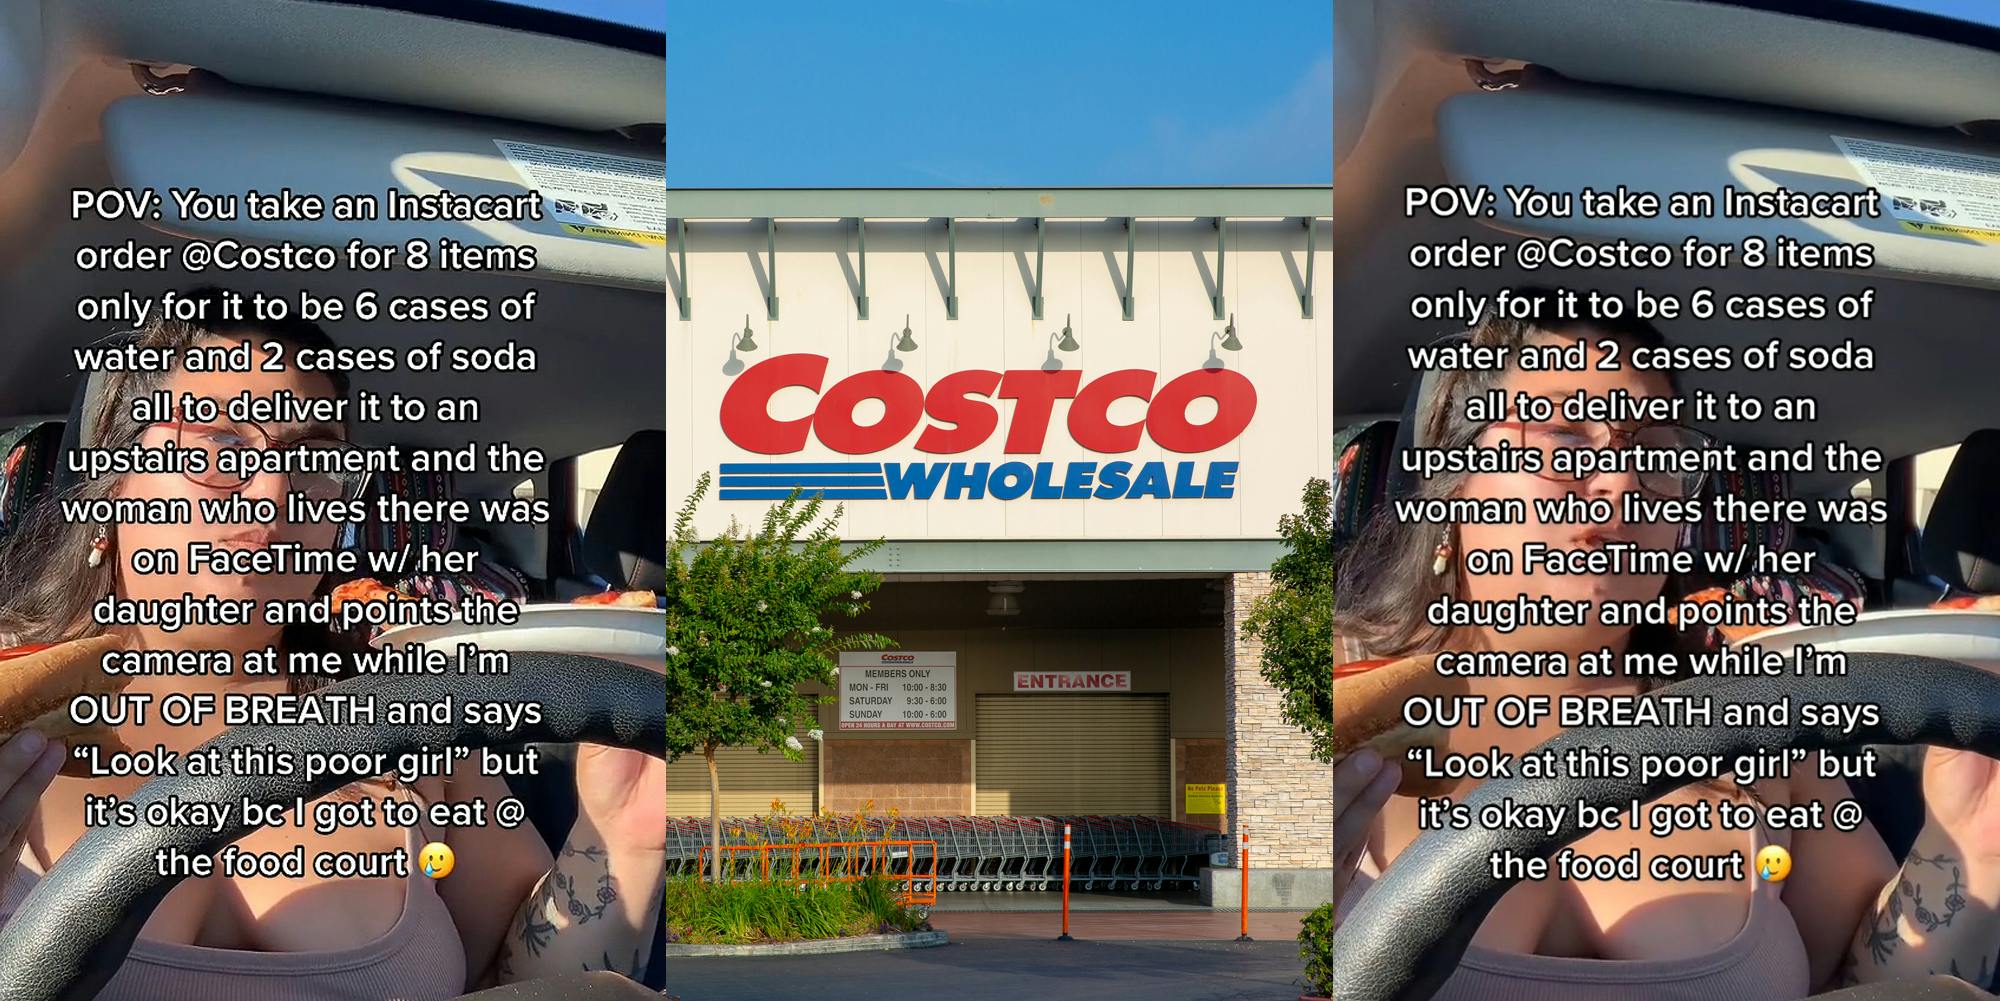 Instacart Shopper Sparks Discourse About Costco Orders